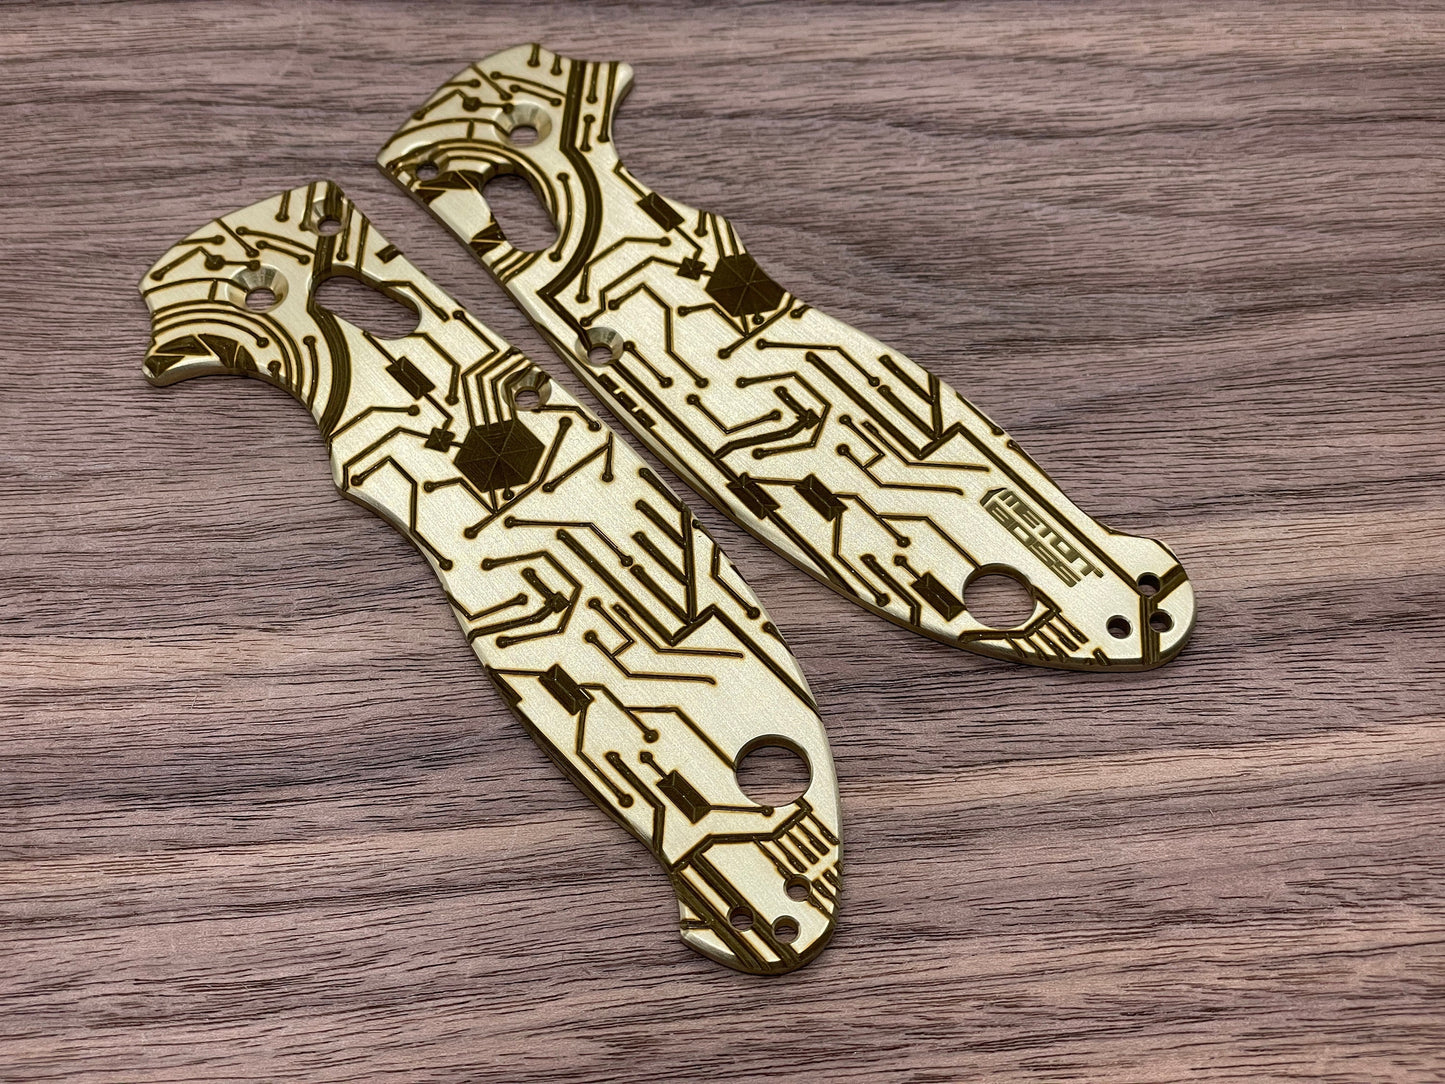 CIRCUIT Board engraved Brass scales for Spyderco MANIX 2